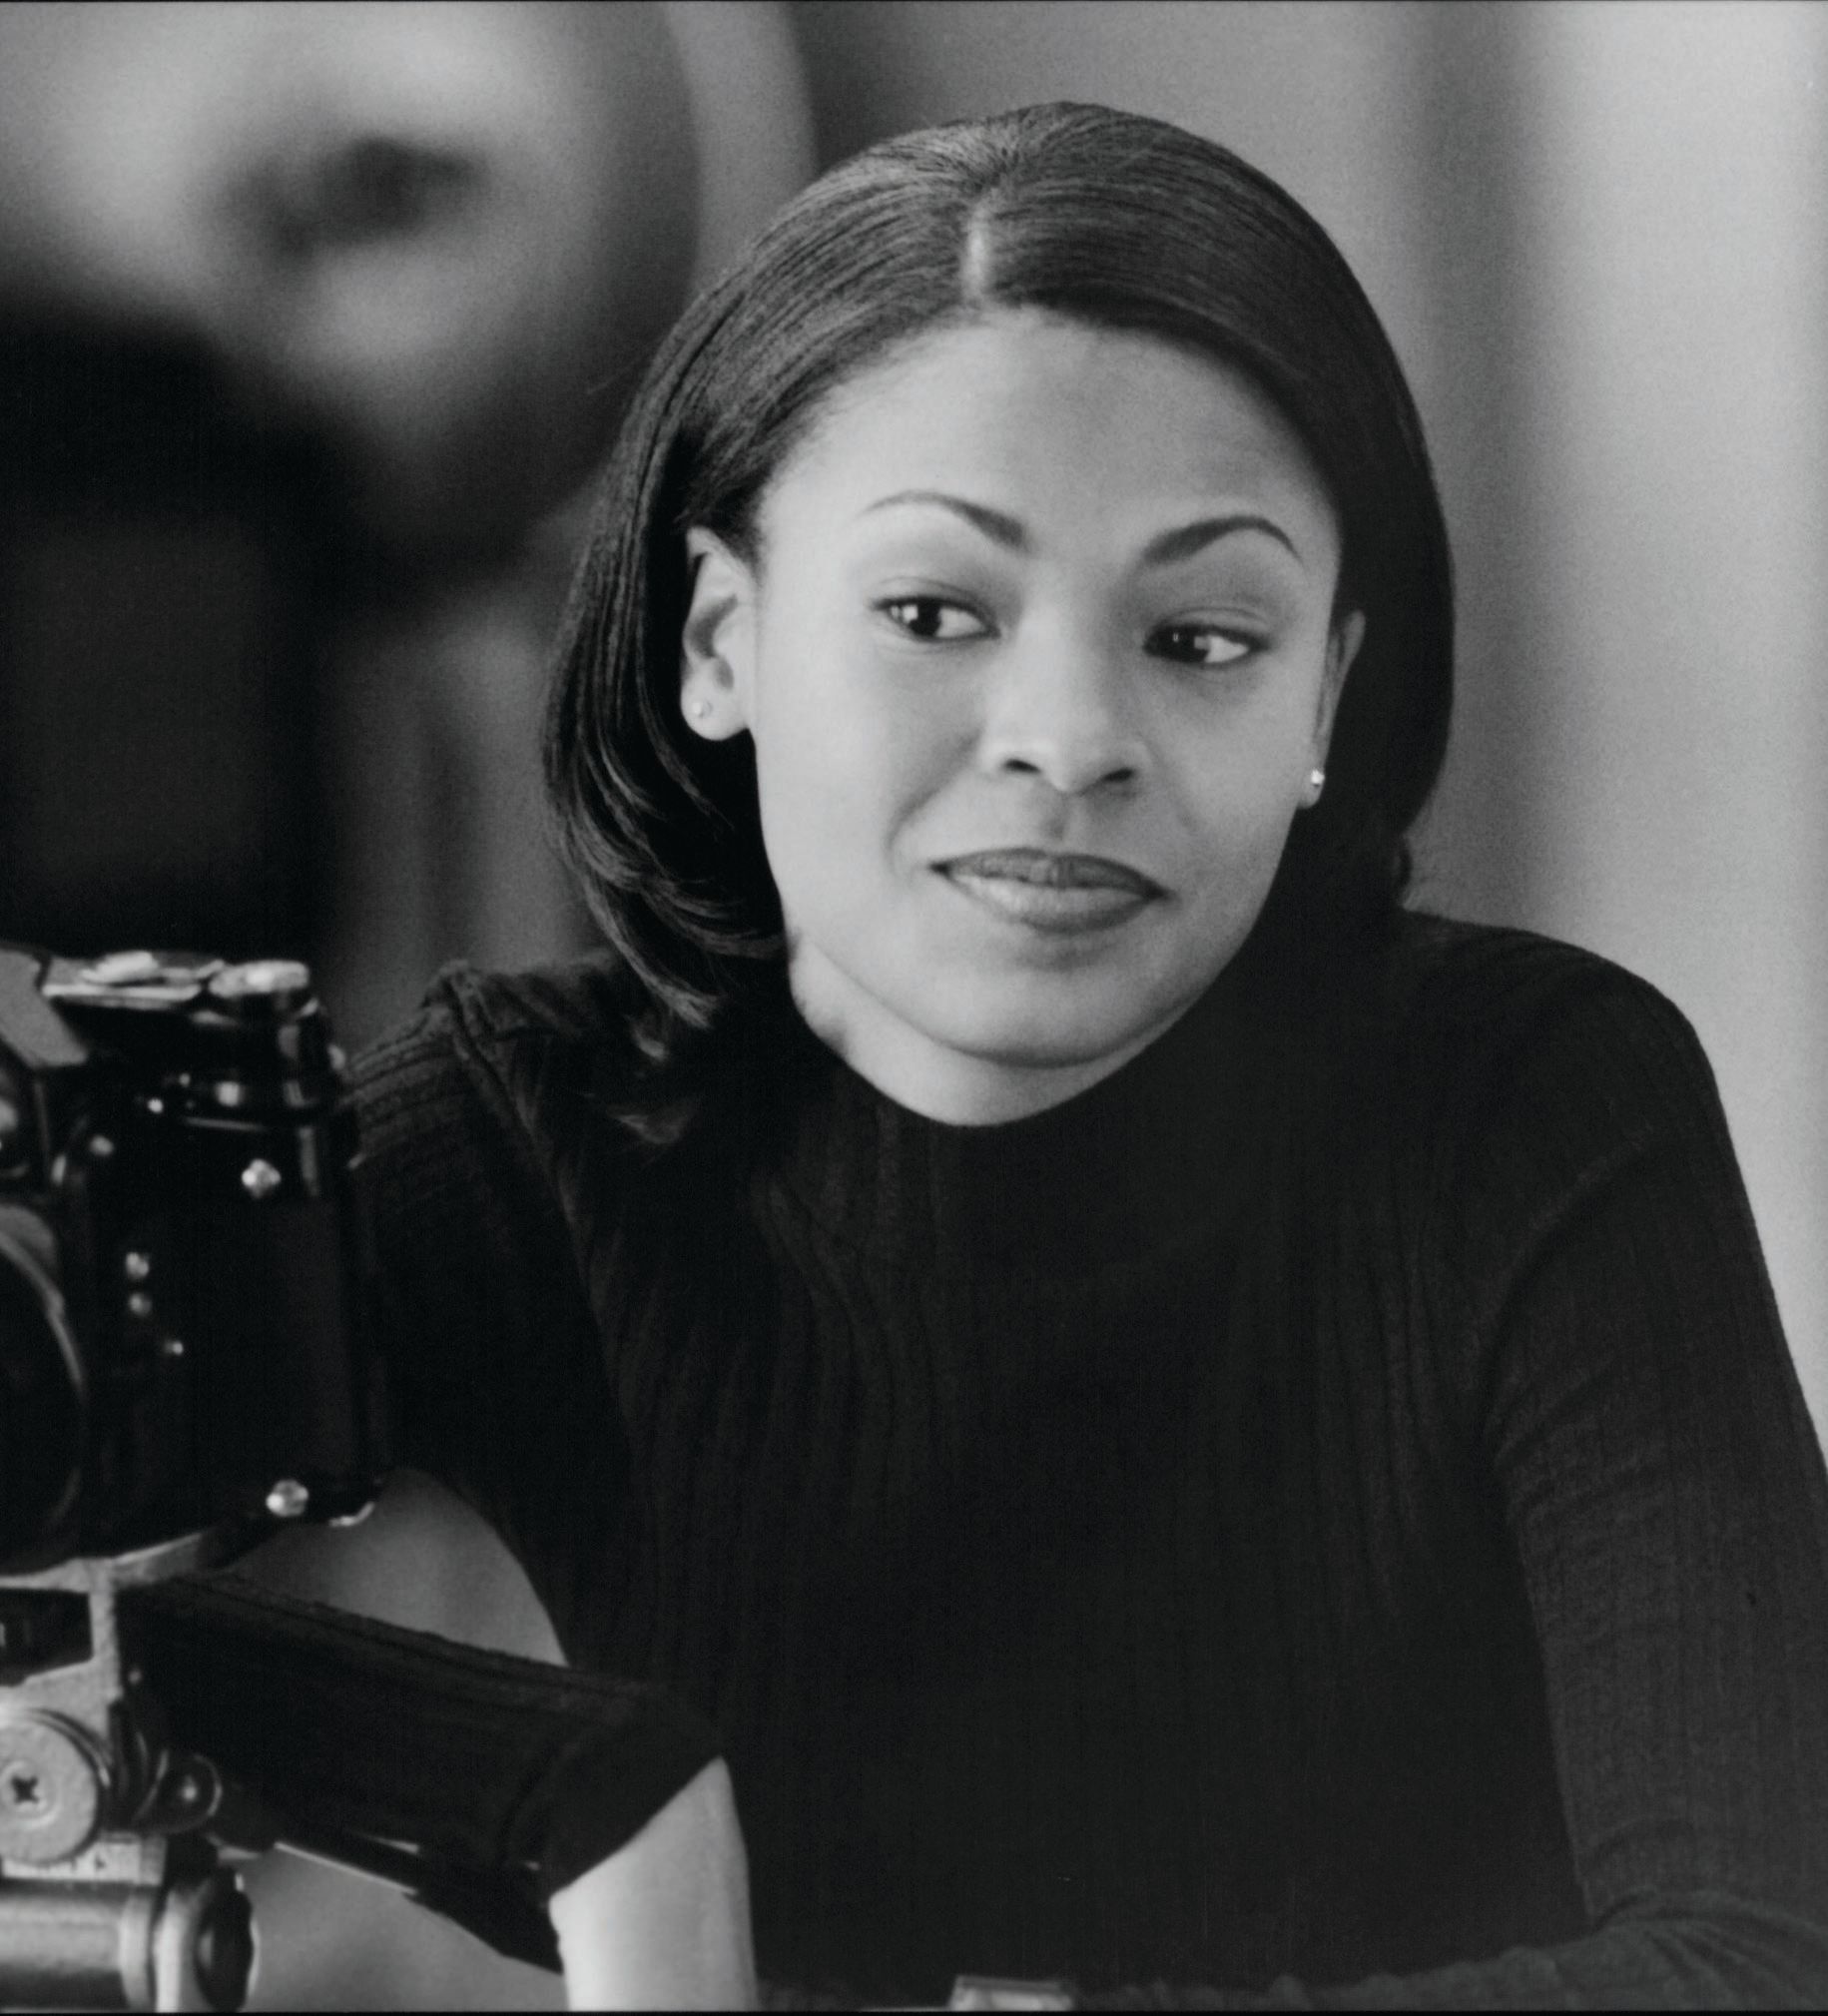 Actress Nia Long on set of the New Line Cinema movie Love Jones, circa 1997 PHOTO BY MICHAEL P. WEINSTEIN / NEW LINE CINEMA COURTESY OF GETTY IMAGES